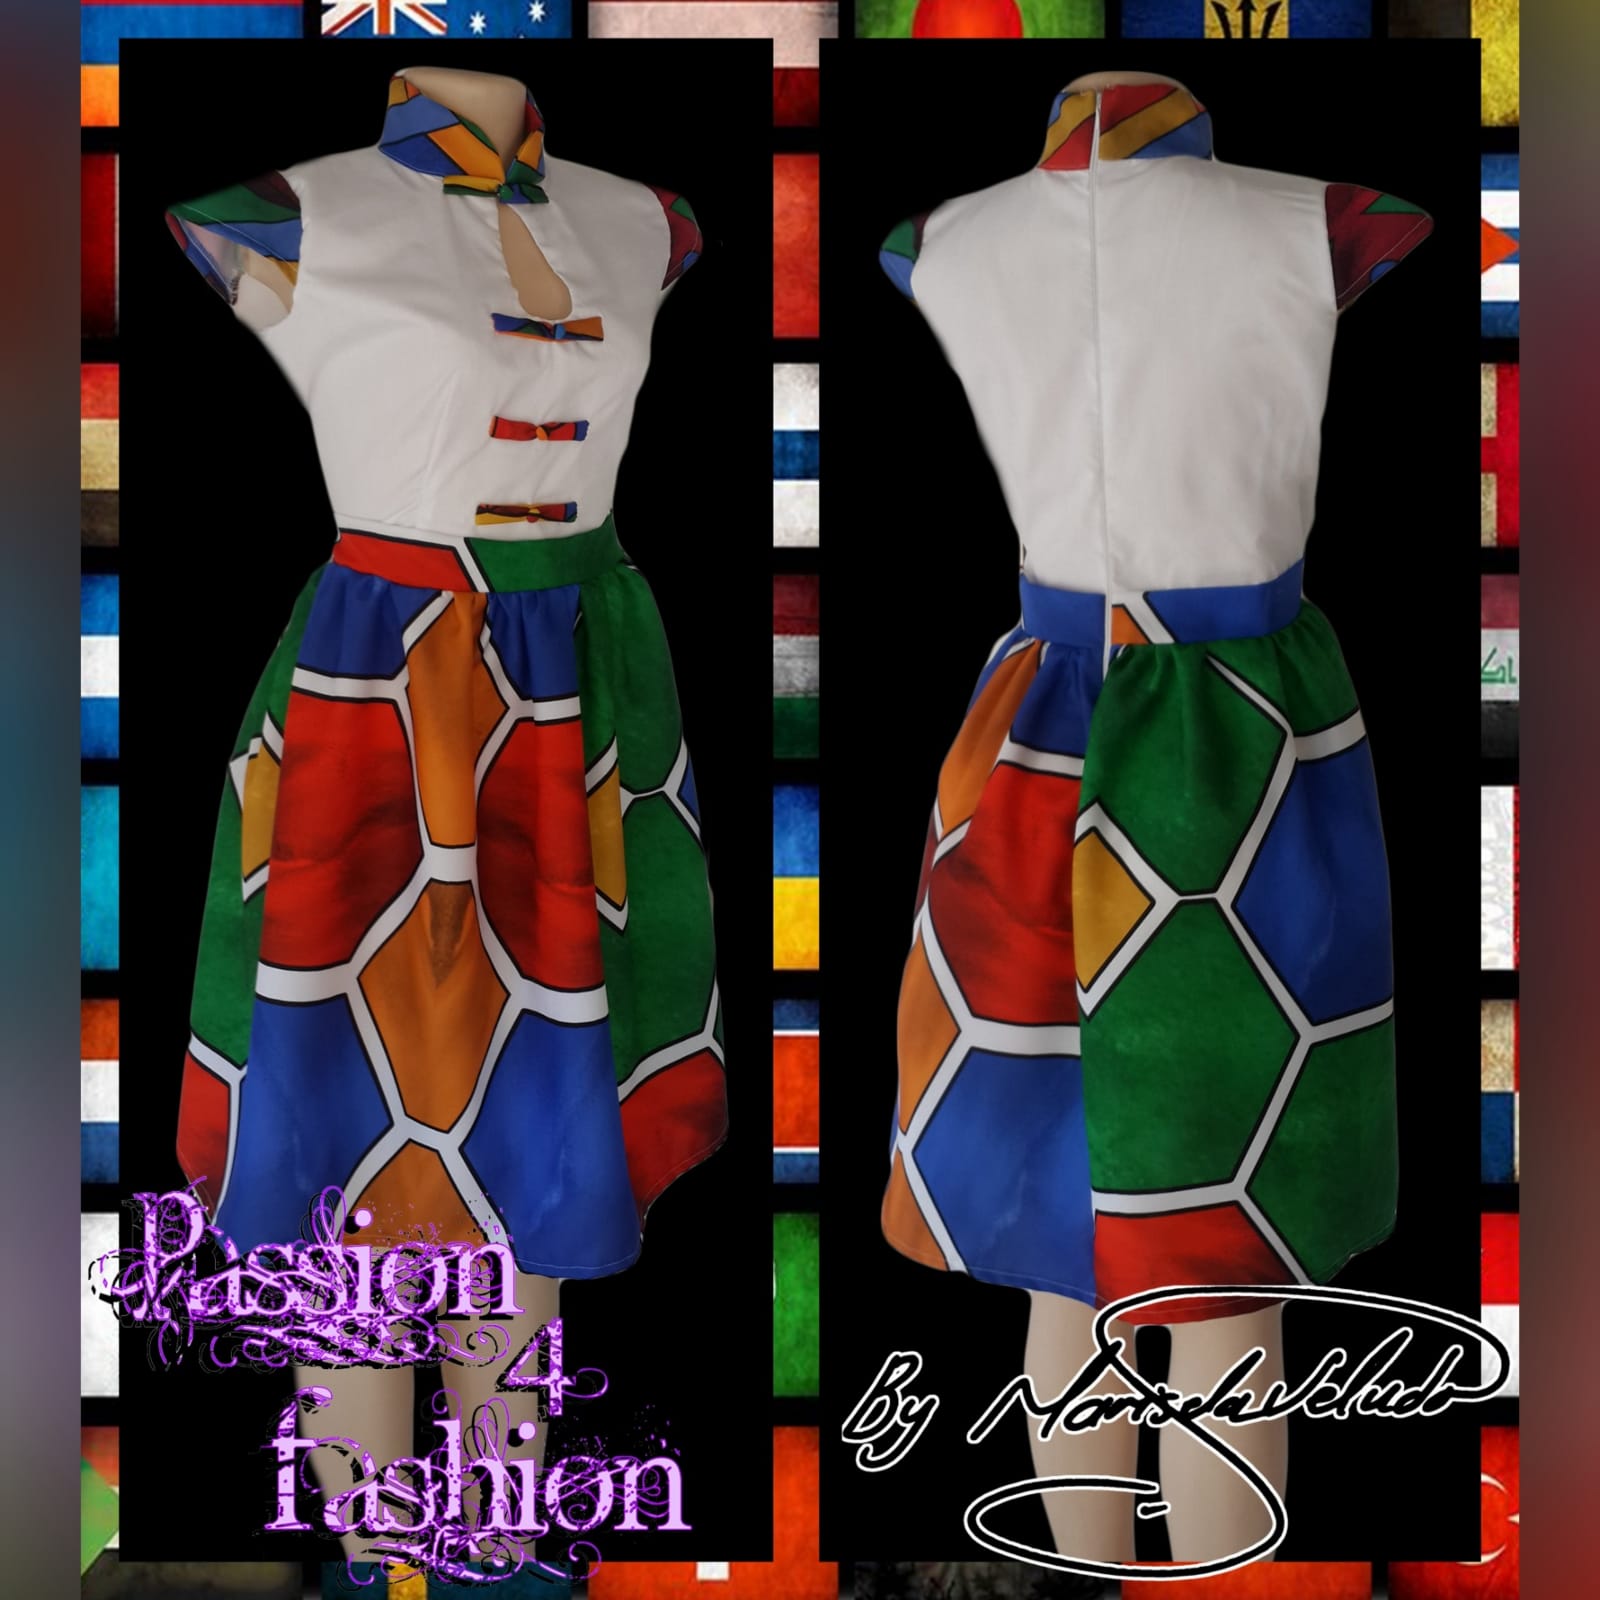 Ndebele dress with white bodice and ndebele print detail 4 traditional ndebele dress, white bodice, chinese collar, cap sleeves and button detail in ndebele print. Bottom of dress in full ndebele print.